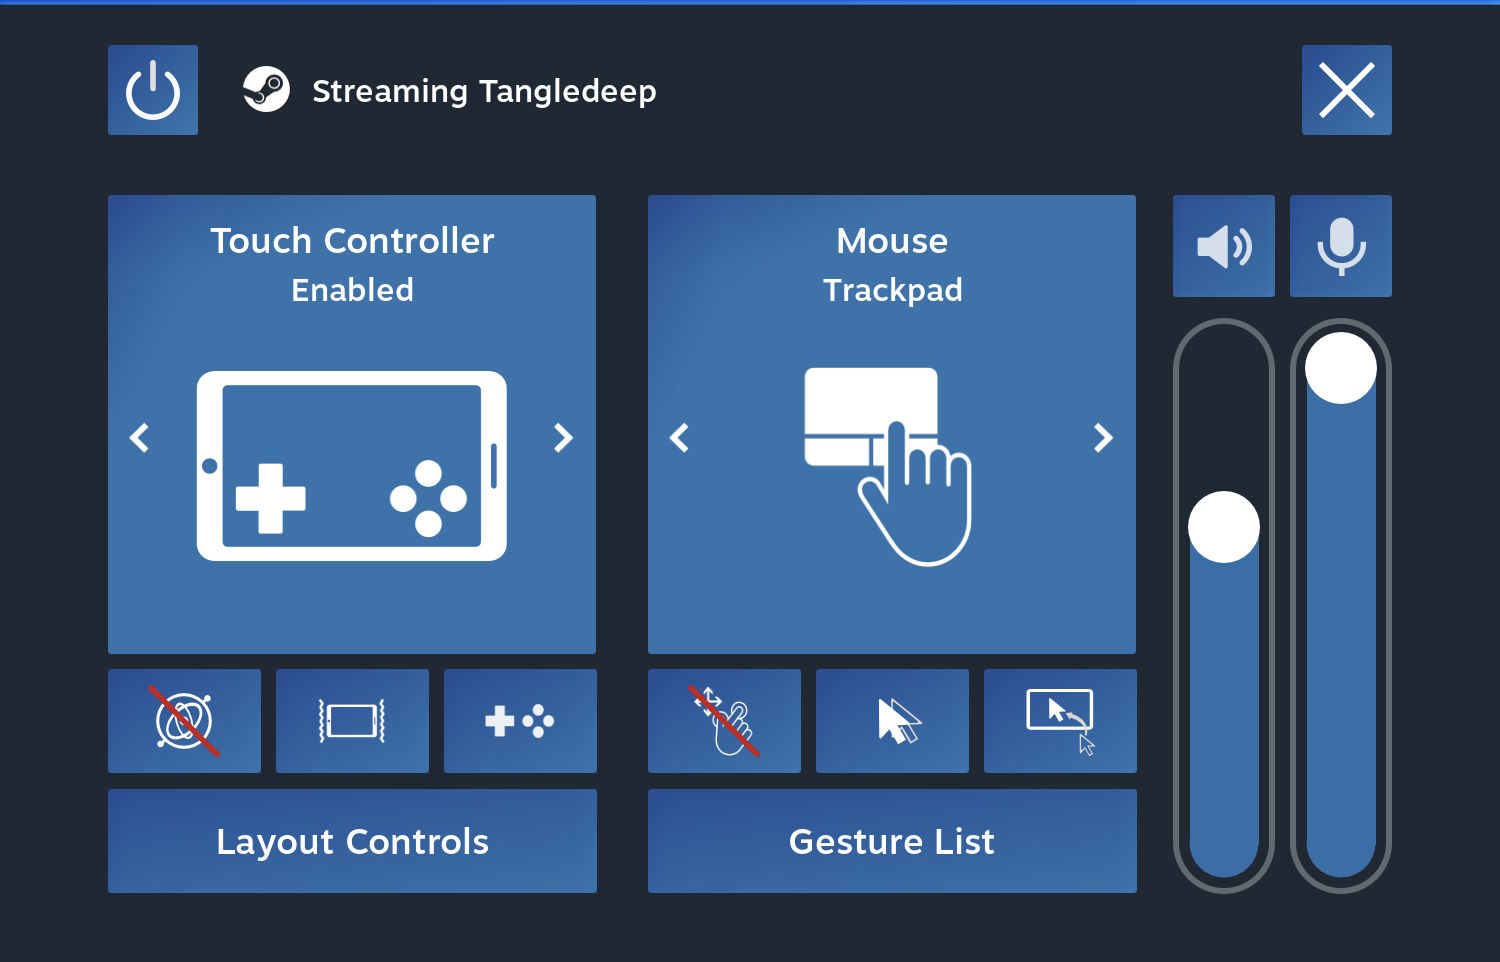 Valve's New Steam Link App Brings PC Games to iOS, Android Devices